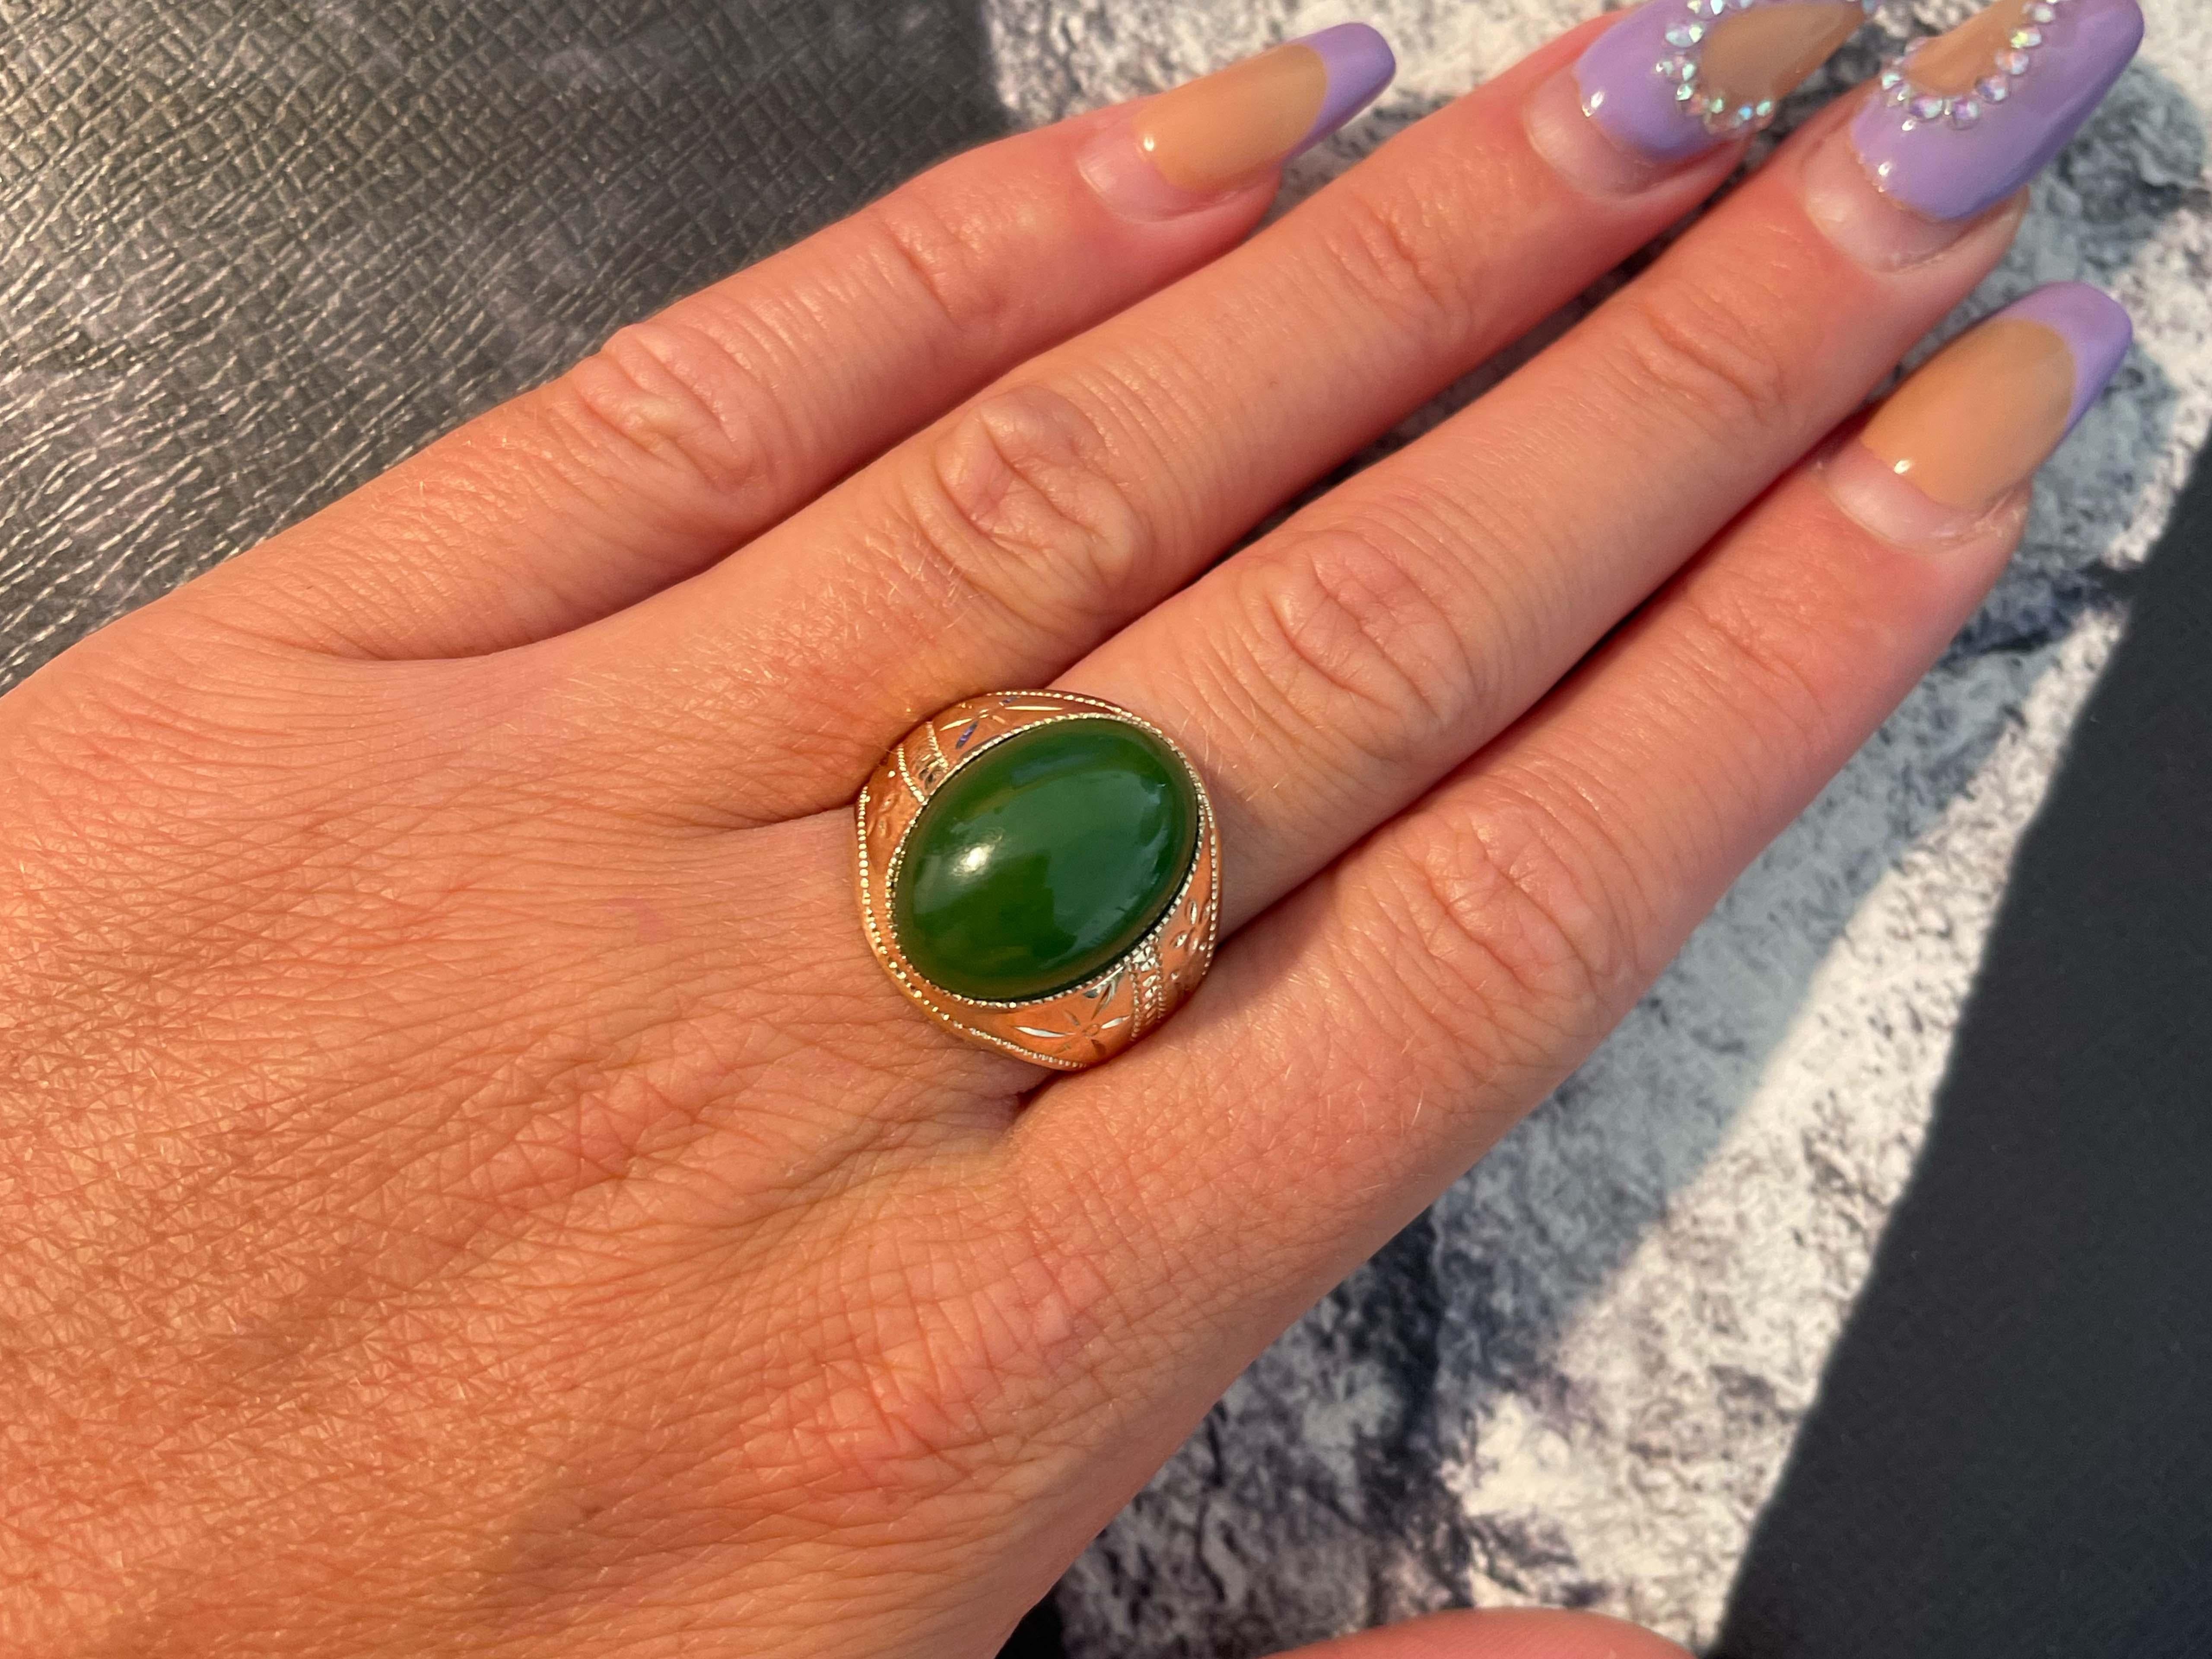 Vintage Men's Oval Dark Green Jade Ring in 18k Rose Gold. Magnificent vintage oval double cabochon dark green jadeite jade ring in 18k rose gold. The beautiful even toned green Jade is bezel set and measures approximately 18.29 mm x 13.33 mm. The